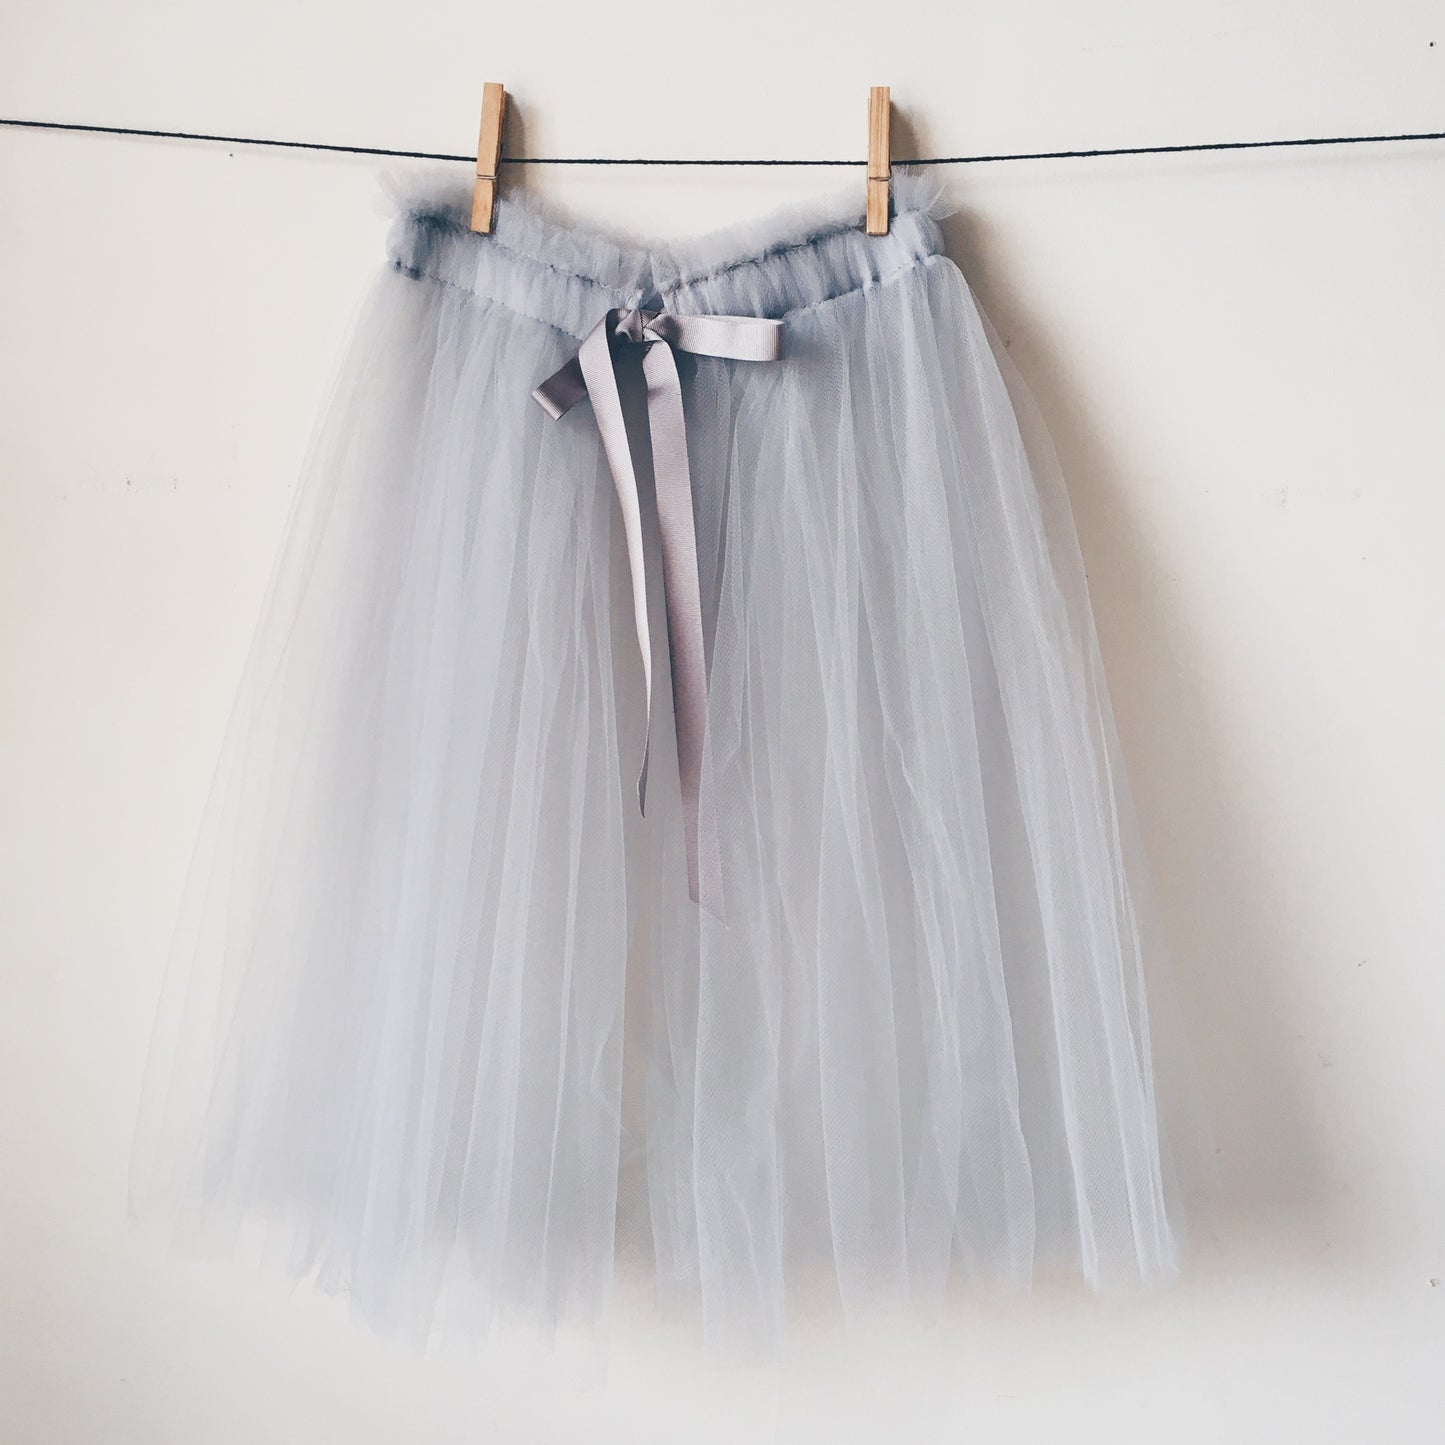 grey Titania romantic tutu by For Just ONE Day